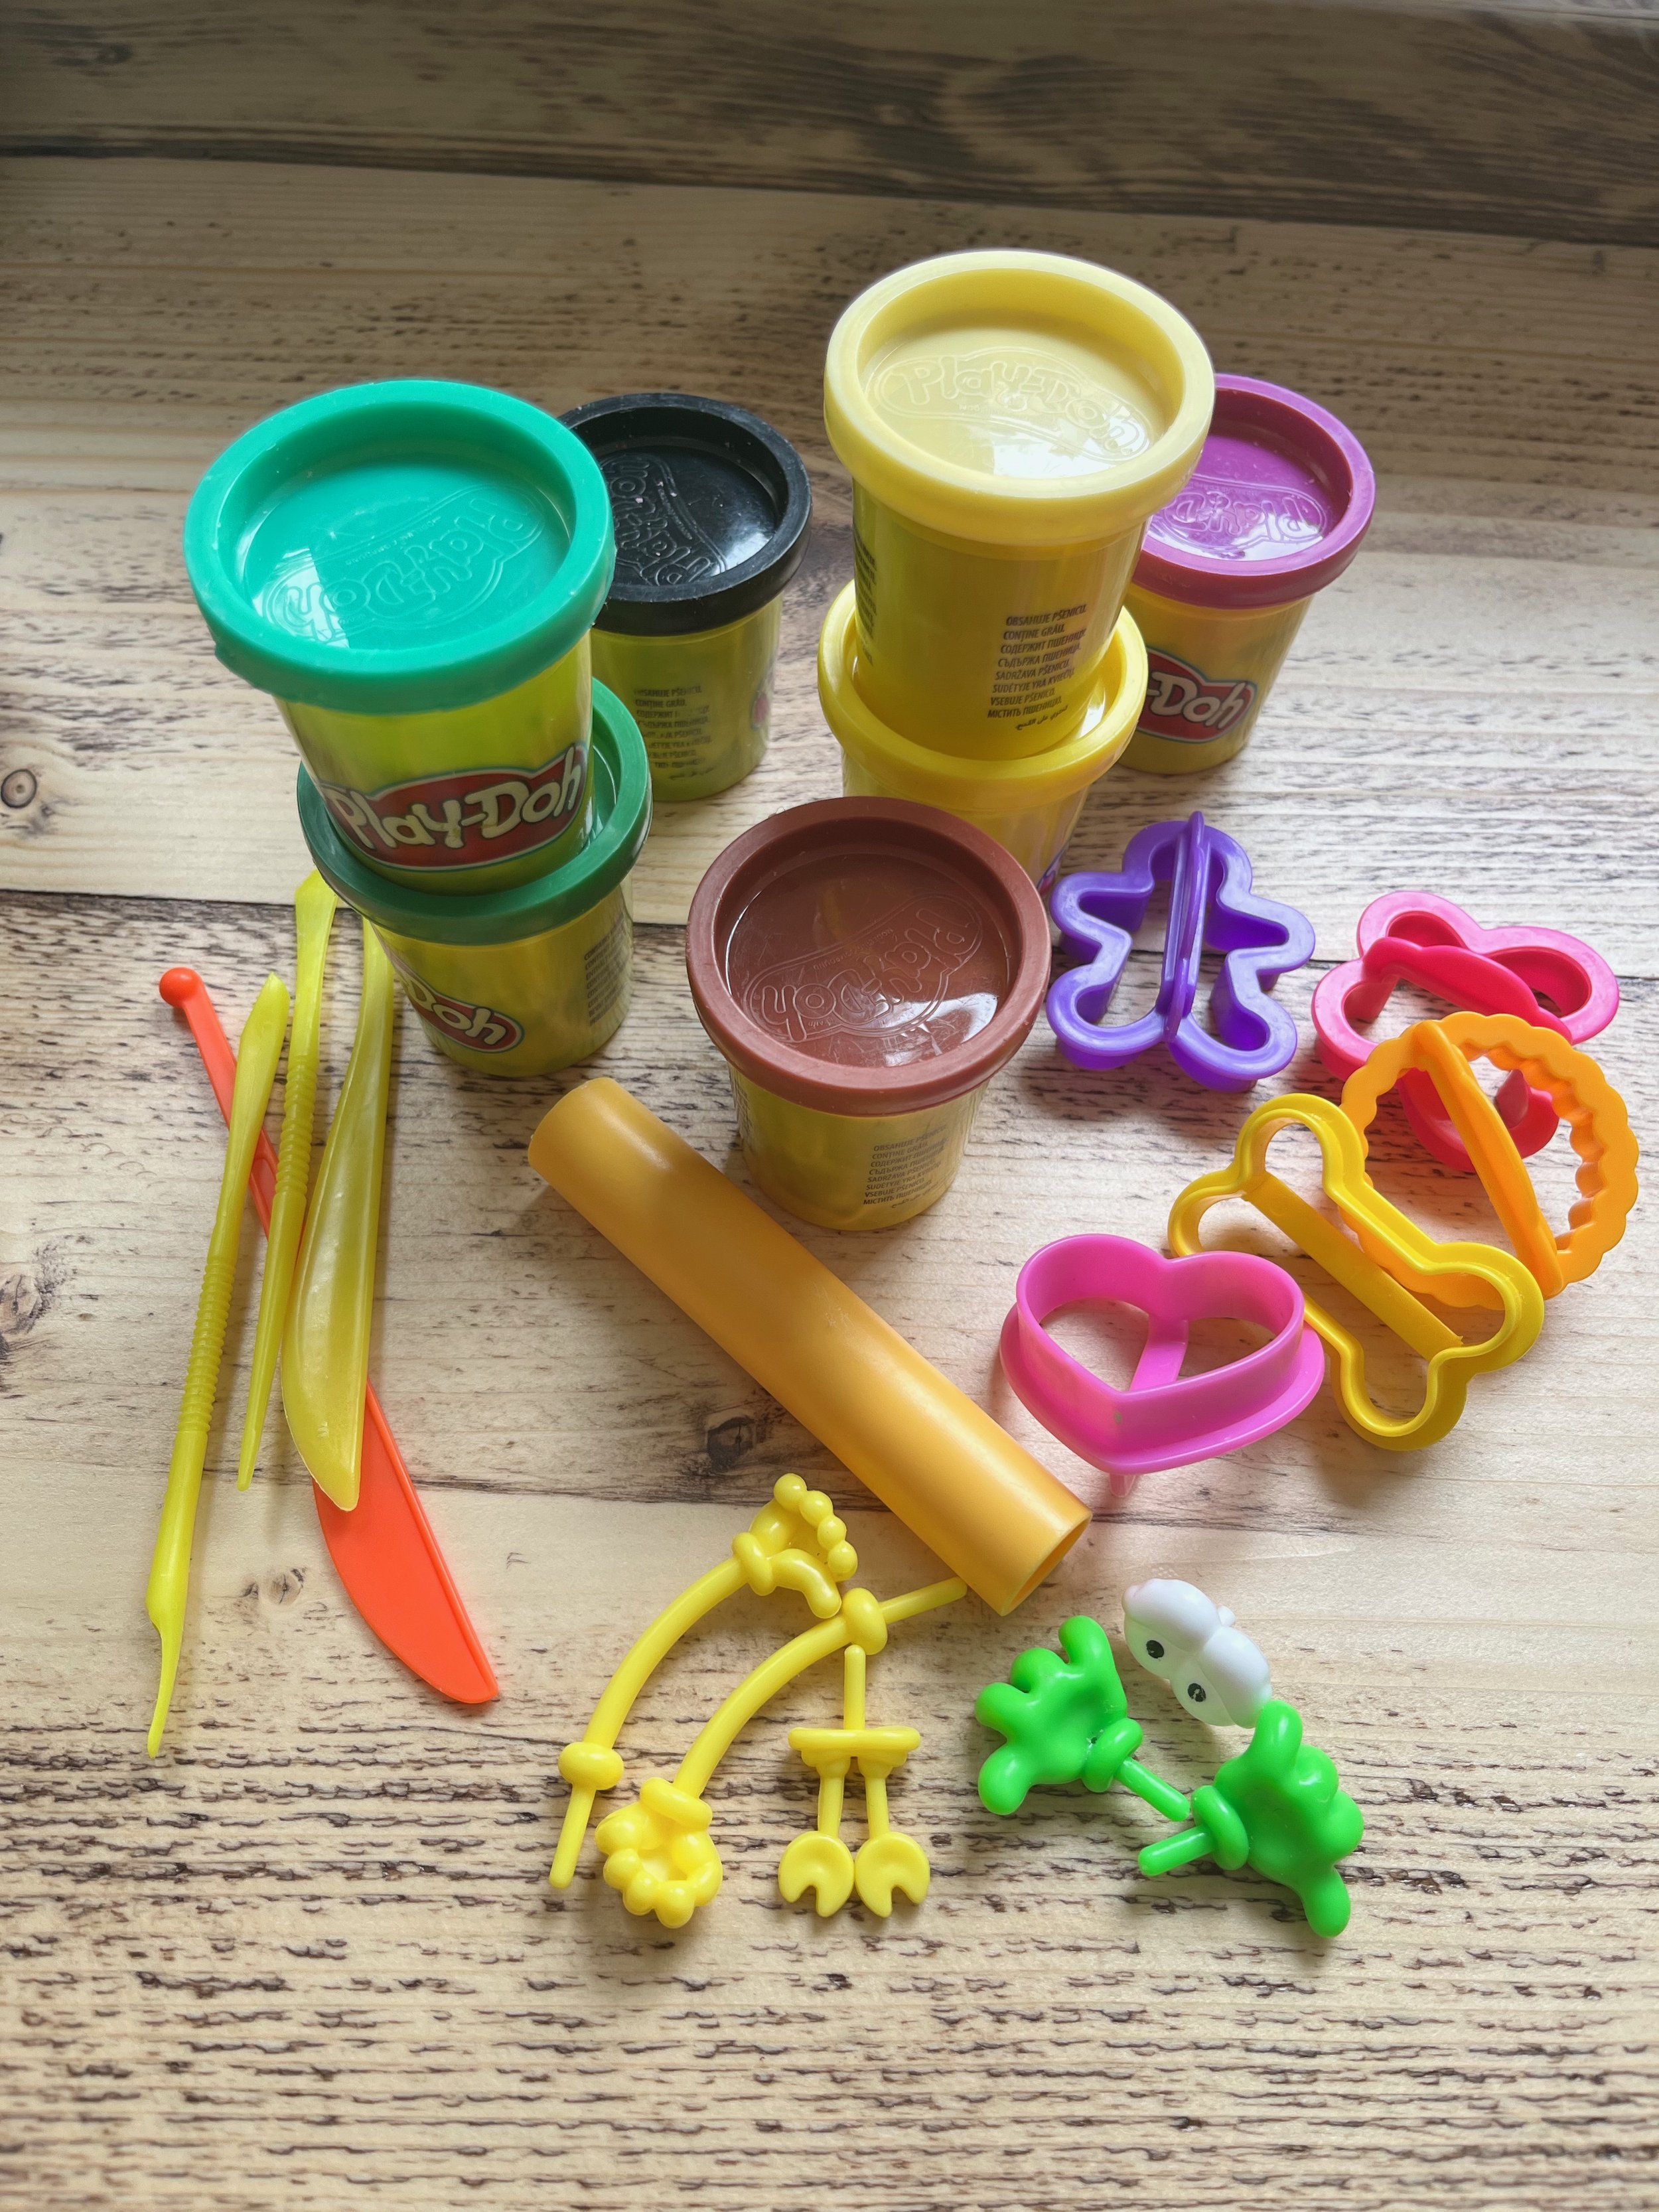 Play doh and play doh body parts